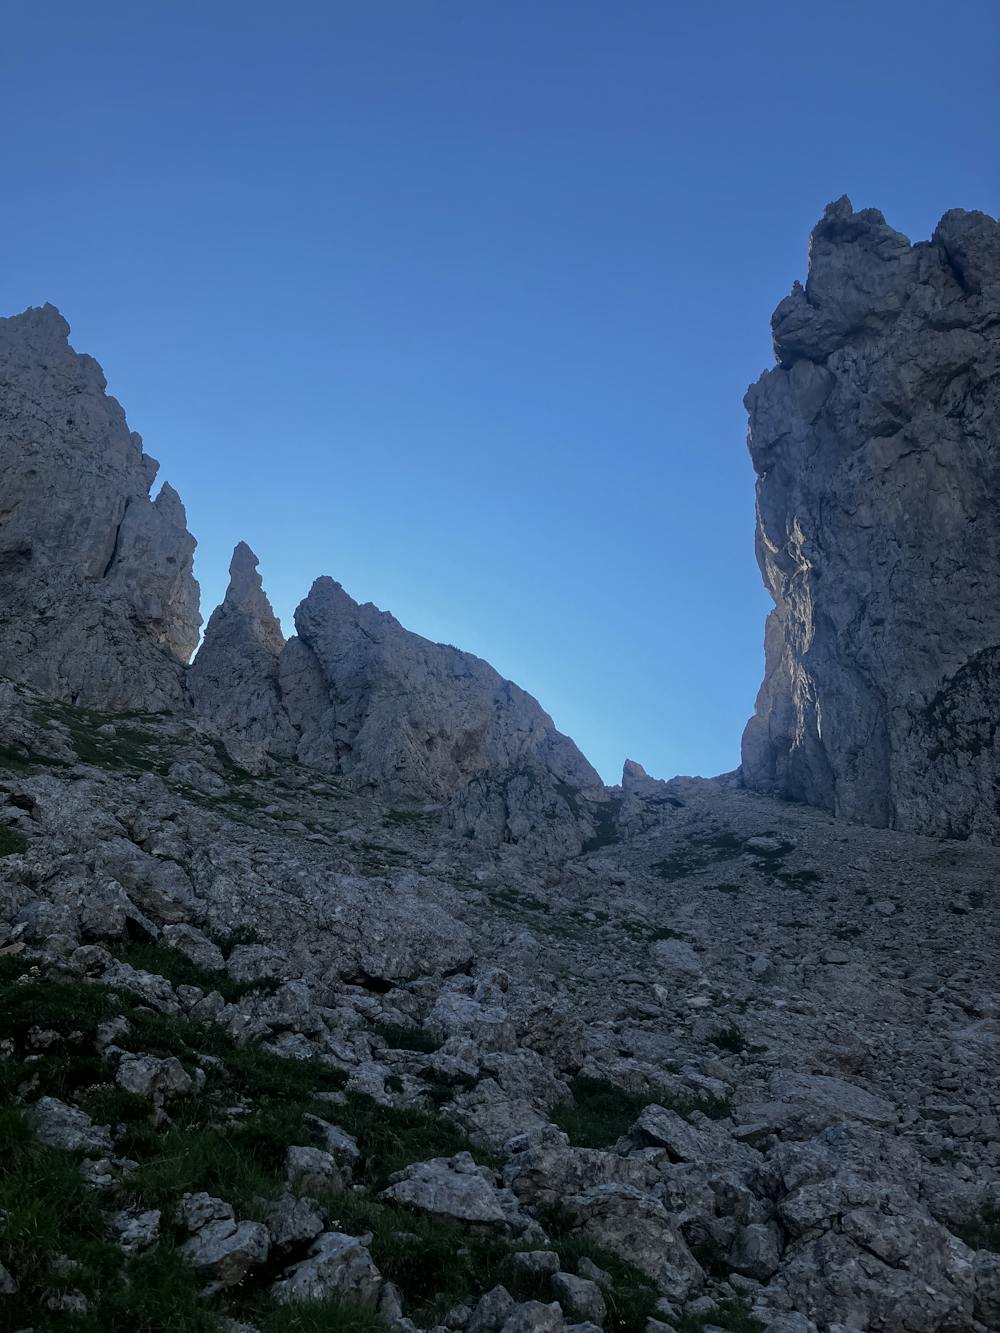 The ascent towards Forcella d'Oltro